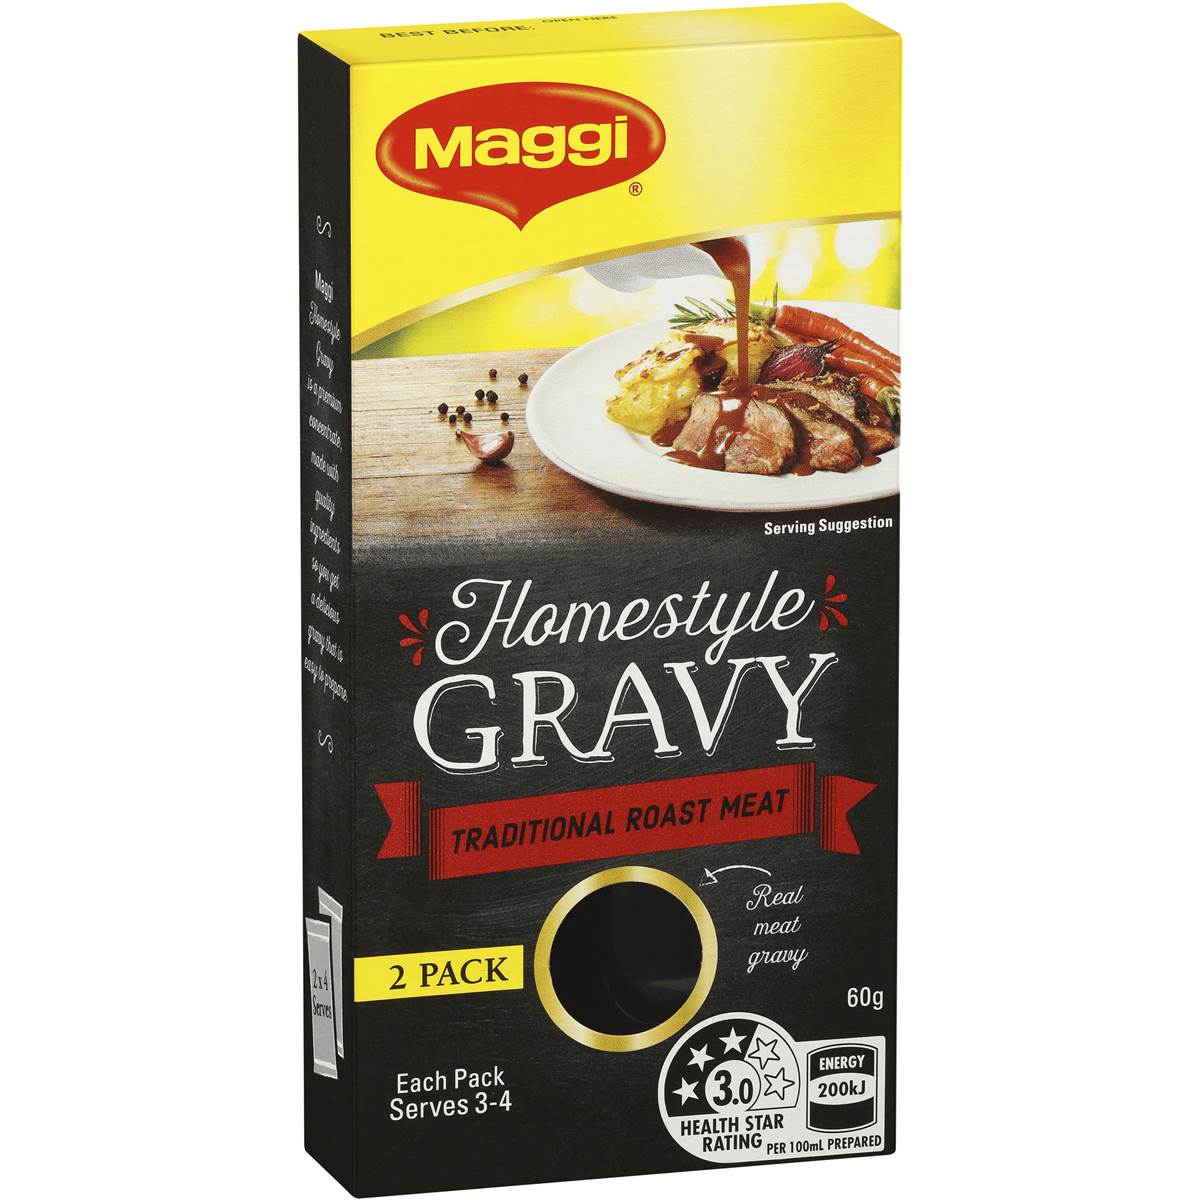 Maggi Homestyle Gravy Concentrate Roast Meat